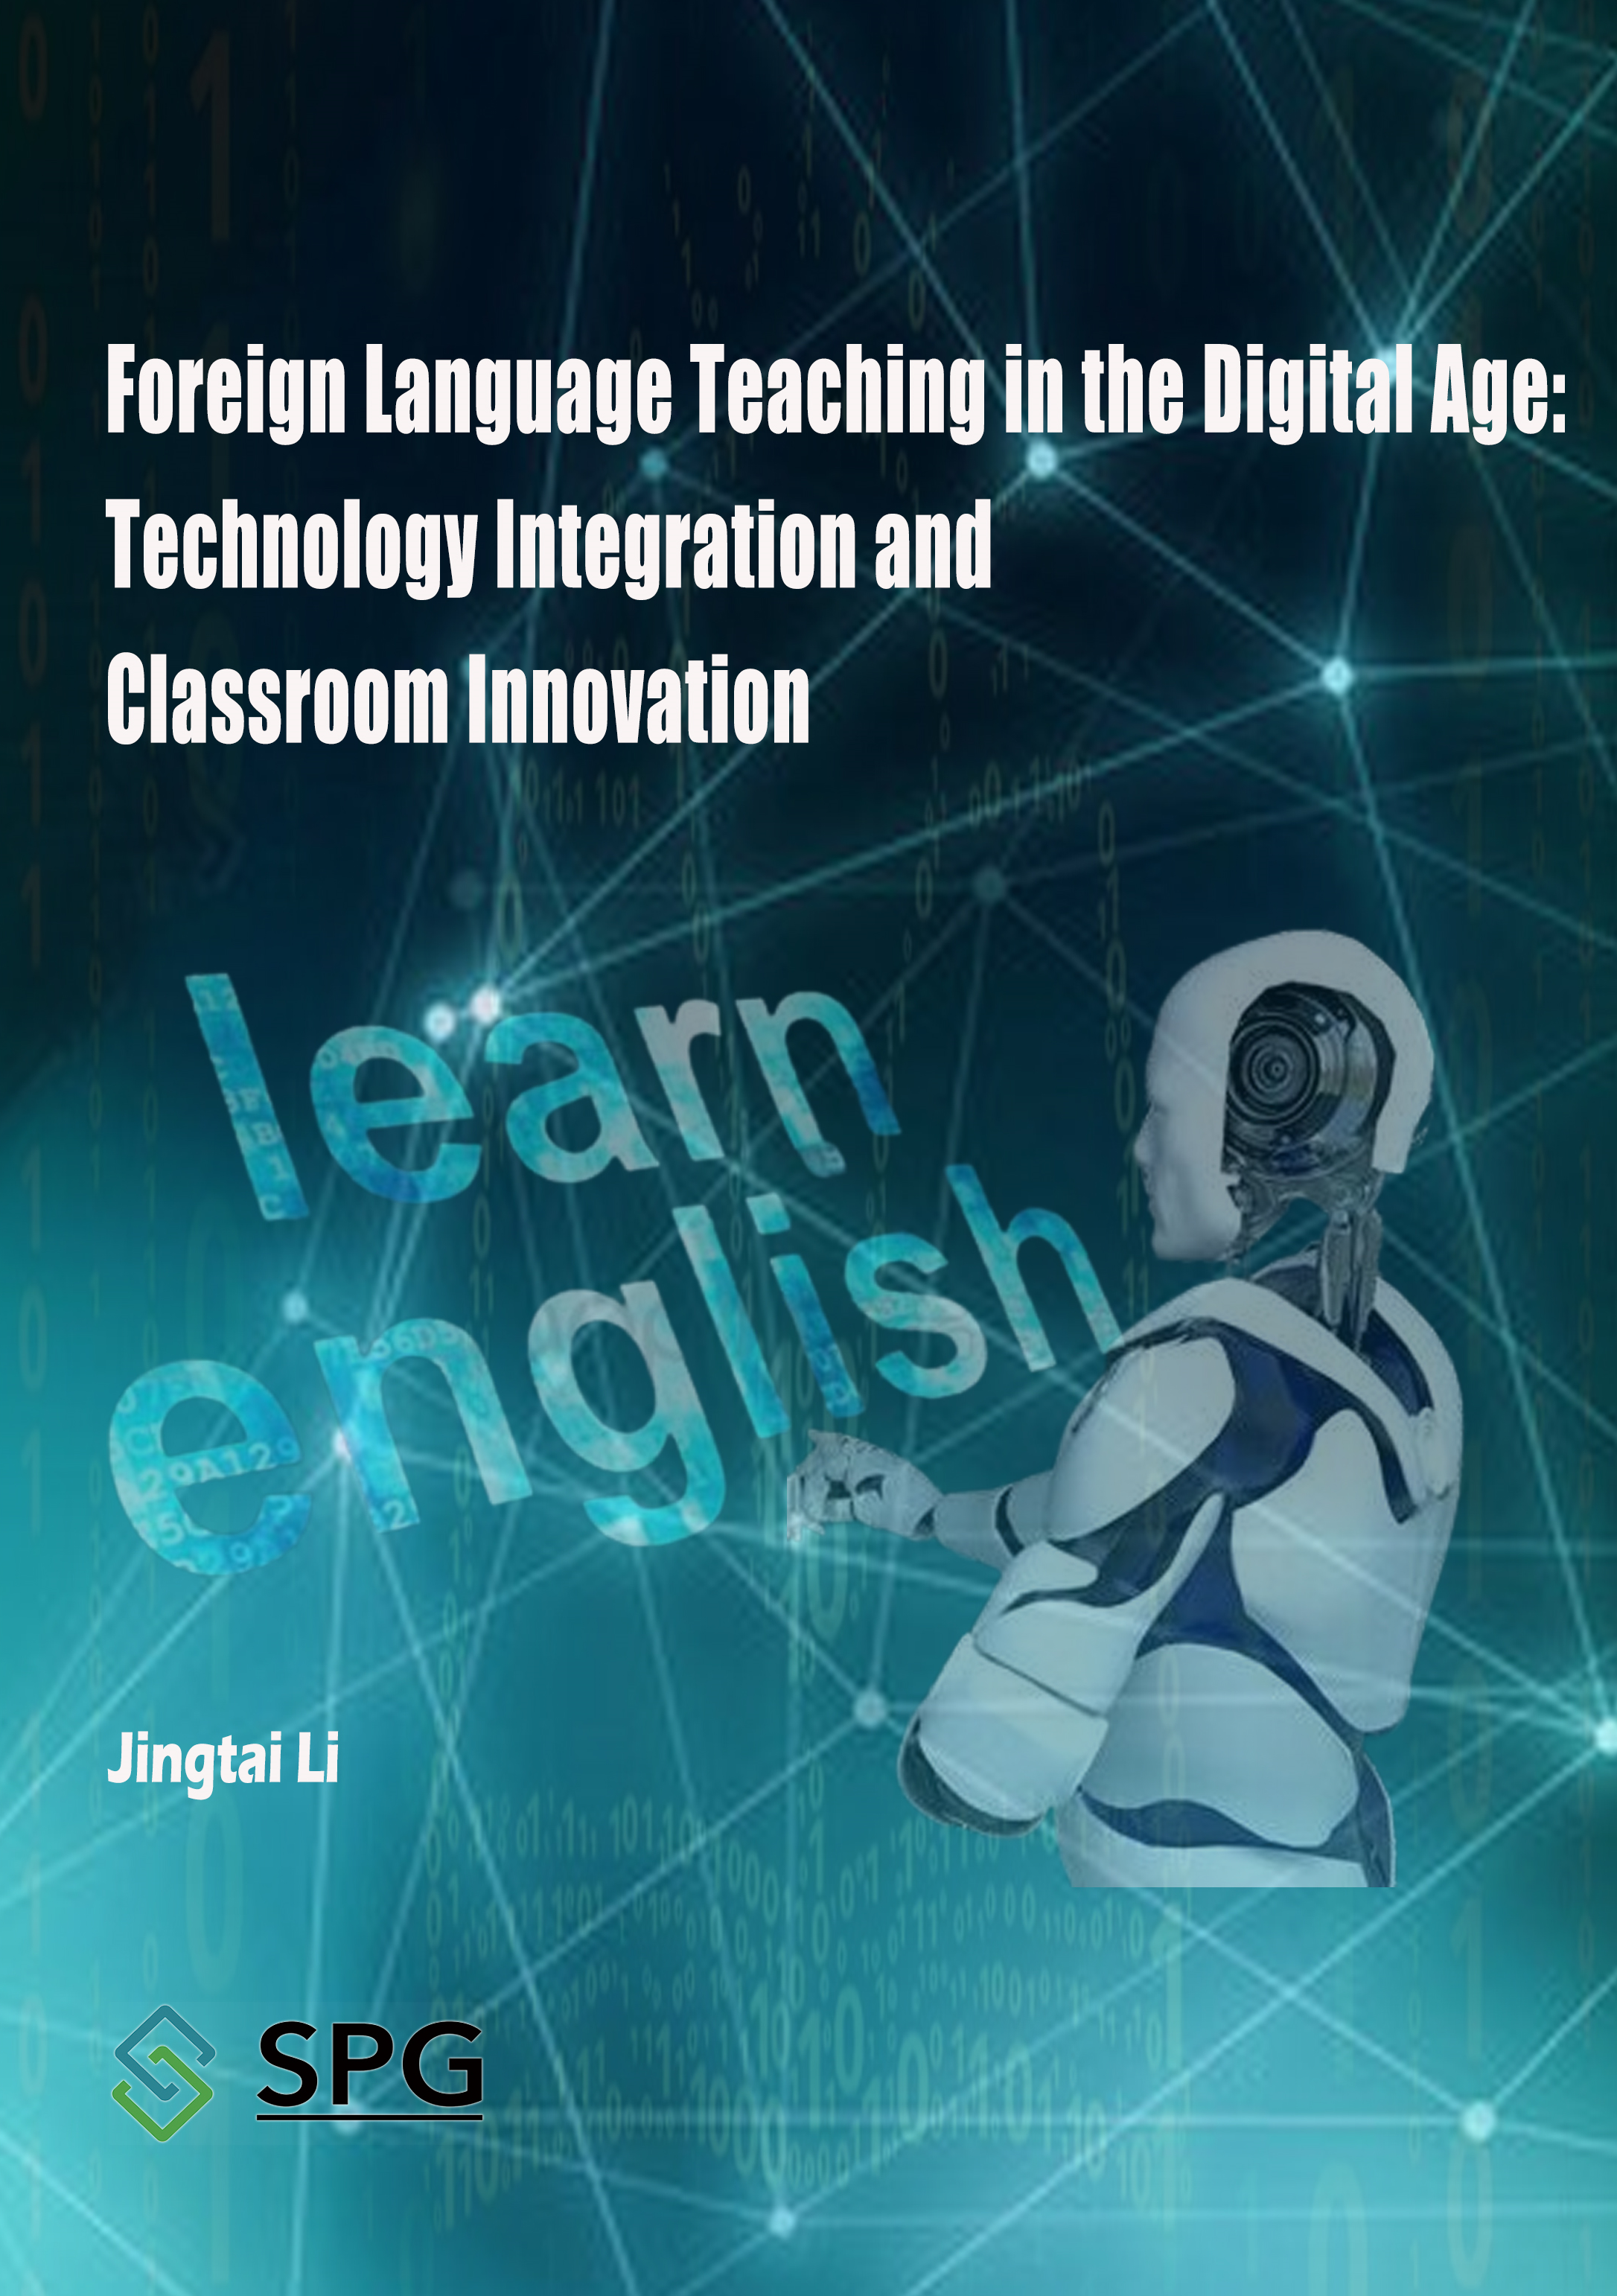 Foreign Language Teaching in the Digital Age: Technology Integration and Classroom Innovation | Scholar Publishing Group